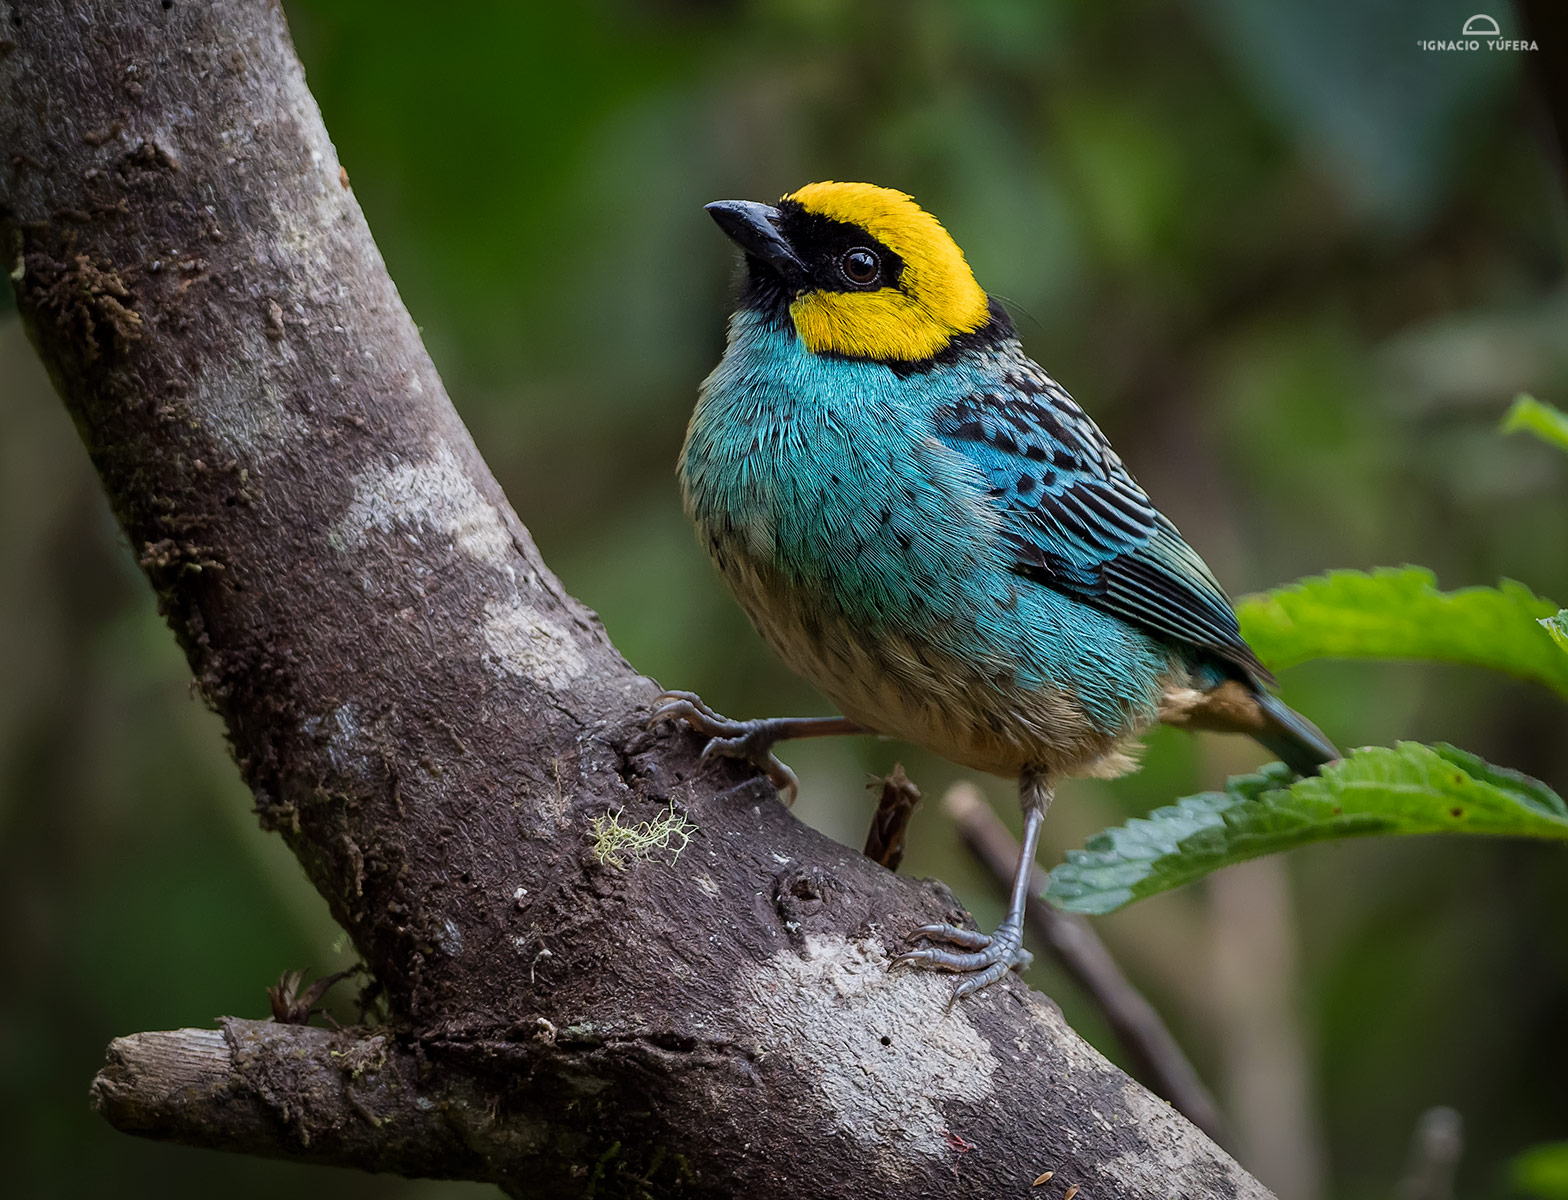 Saffron-crowned Tanager (Tangara xanthocephala), Cauca Valley, Colombia